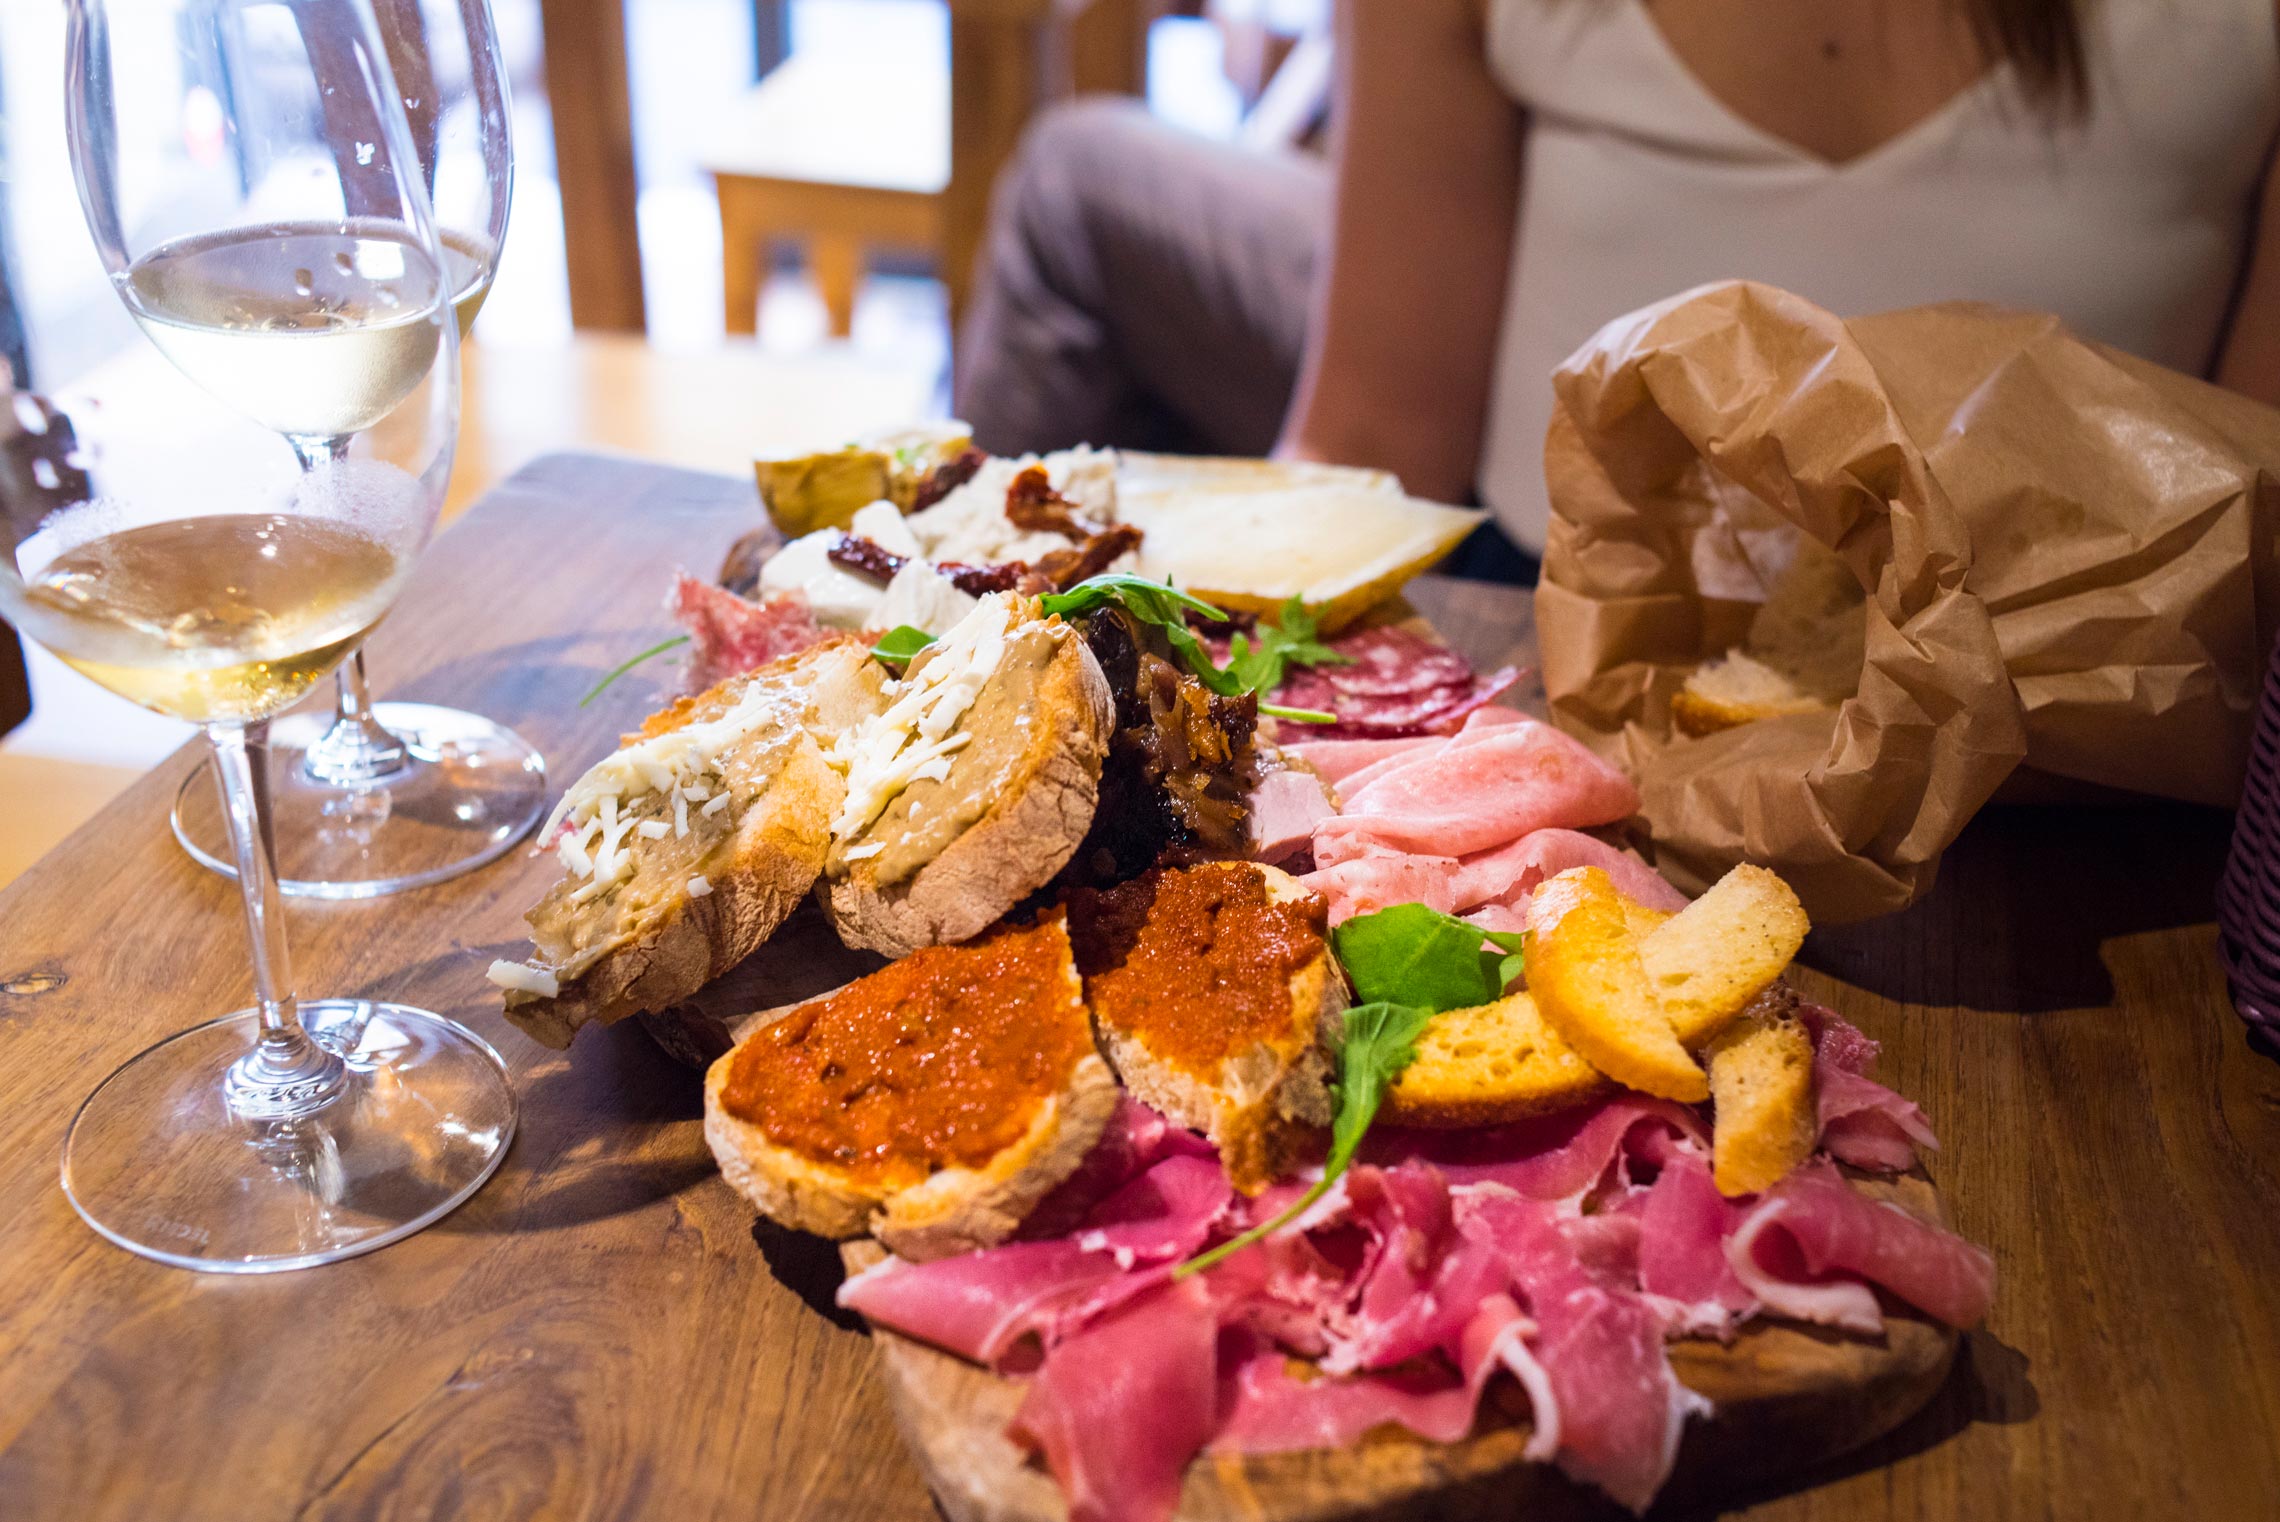 Rome Food Diary, Meat and cheese platter